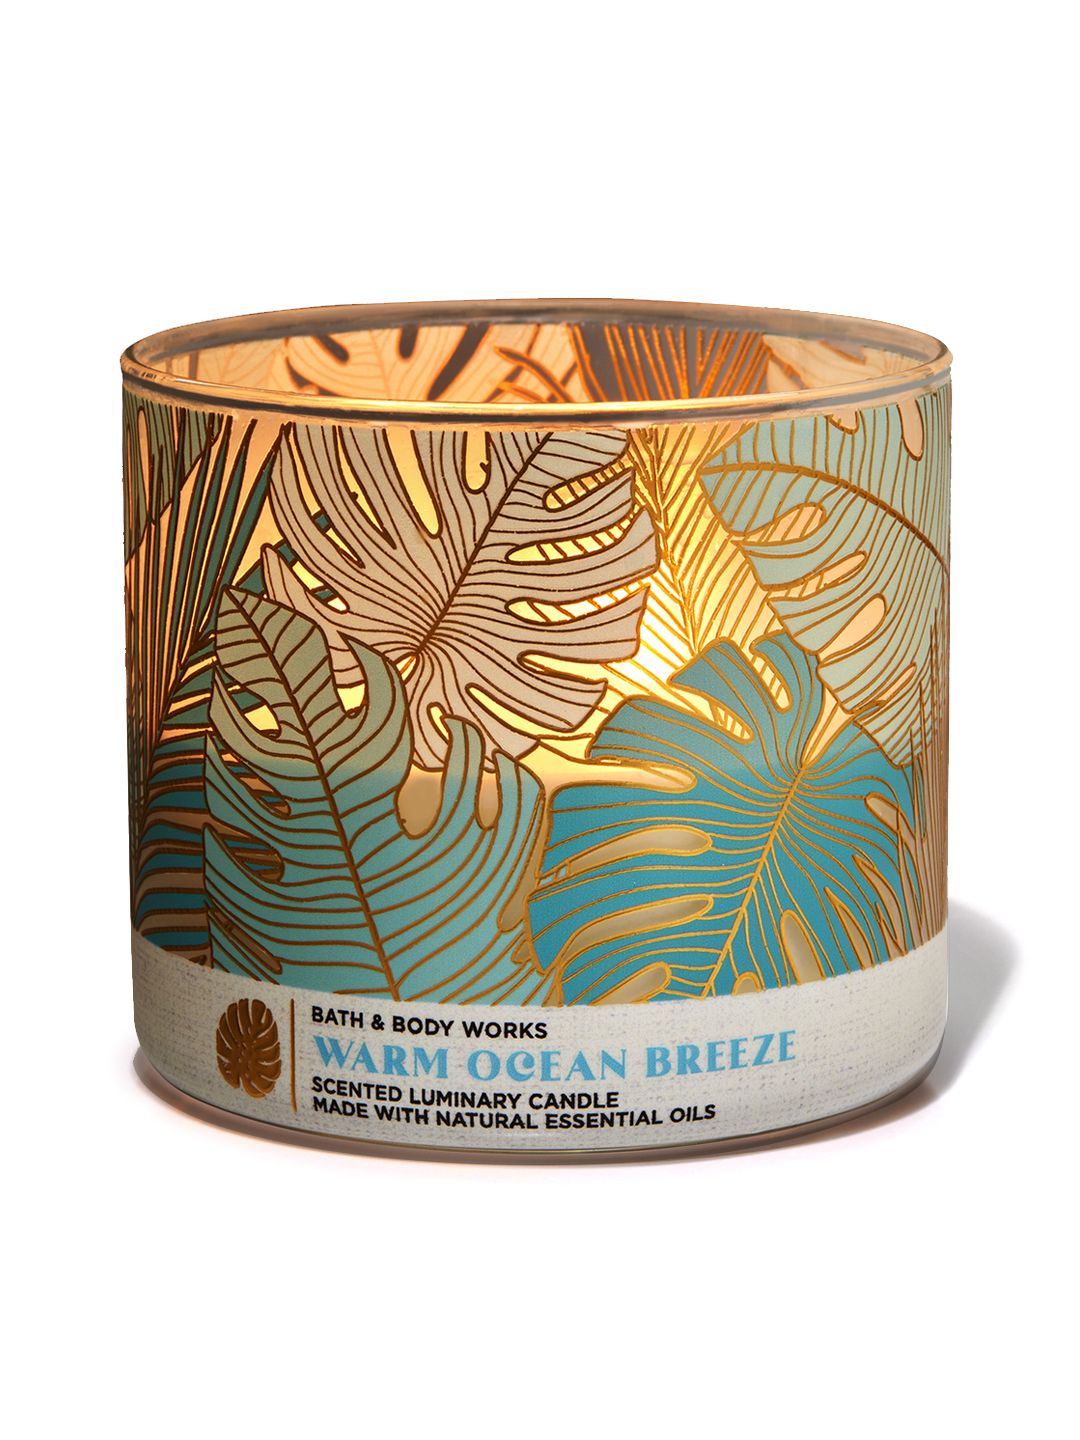 Bath & Body Works Warm Ocean Breeze 3-Wick Scented Luminary Candle - 411 g Price in India